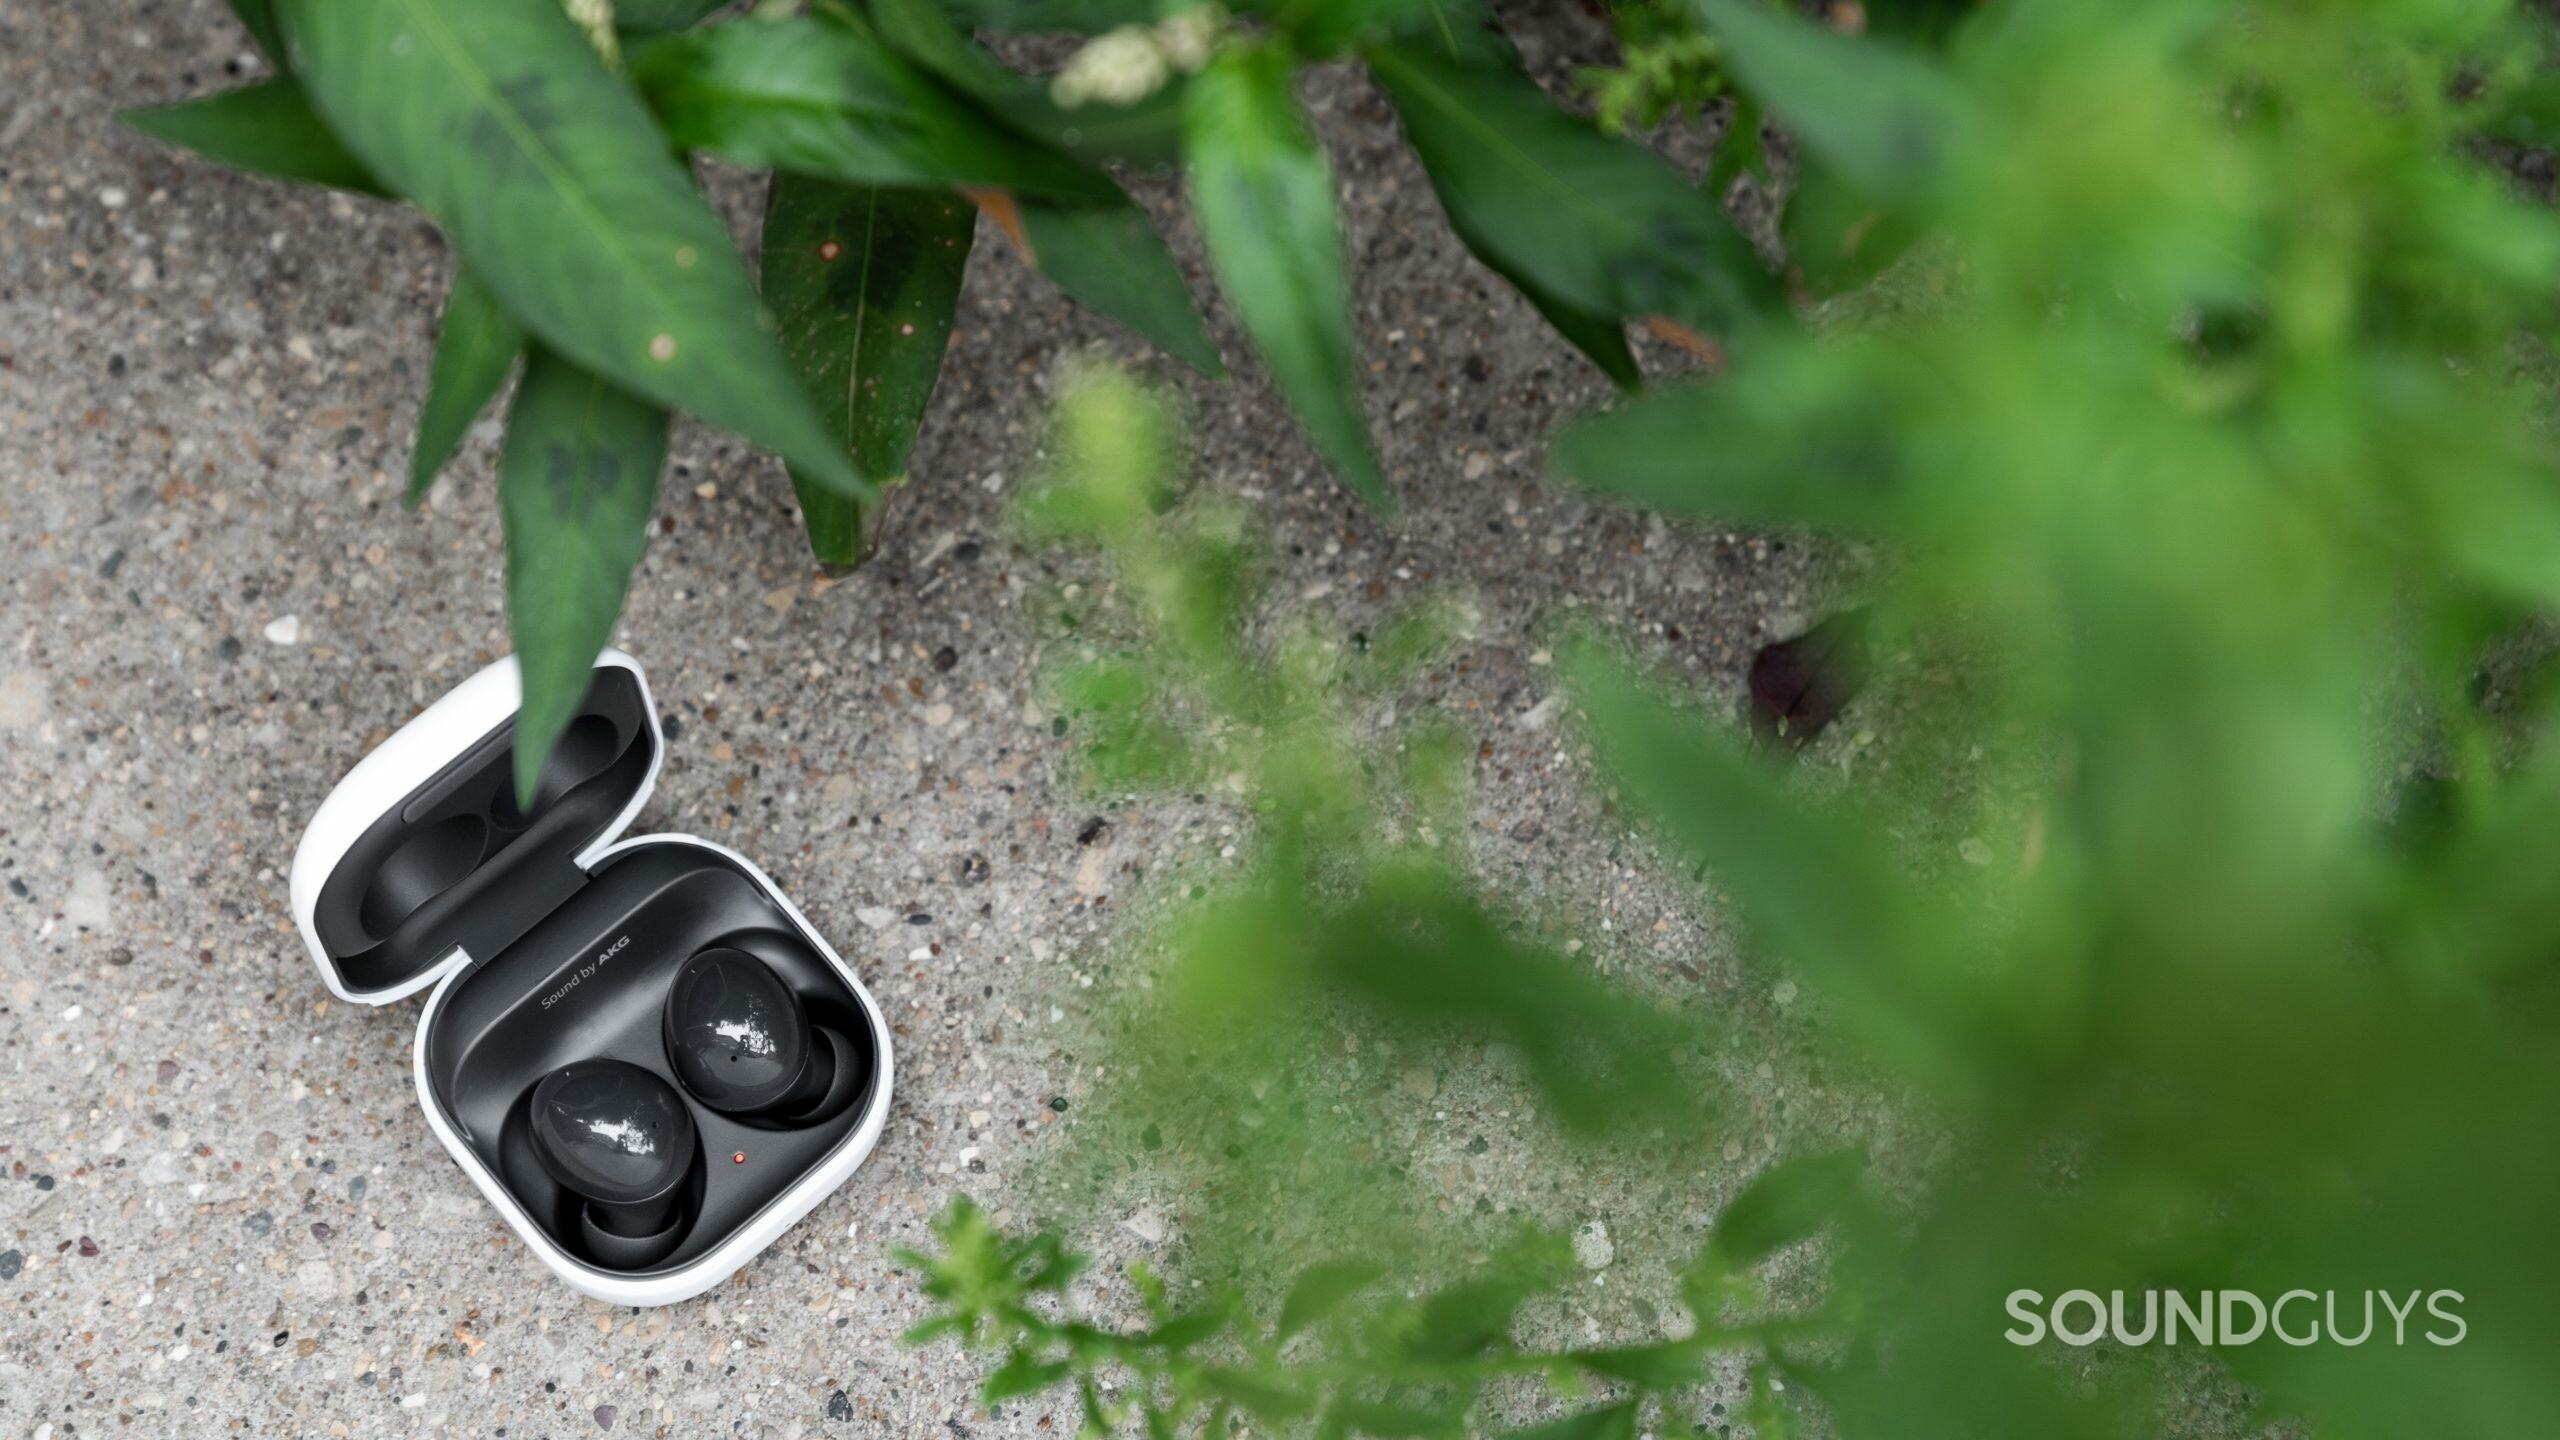 The Samsung Galaxy Buds 2 noise canceling true wireless earbuds in the open charging case, partially obscured by greenery.